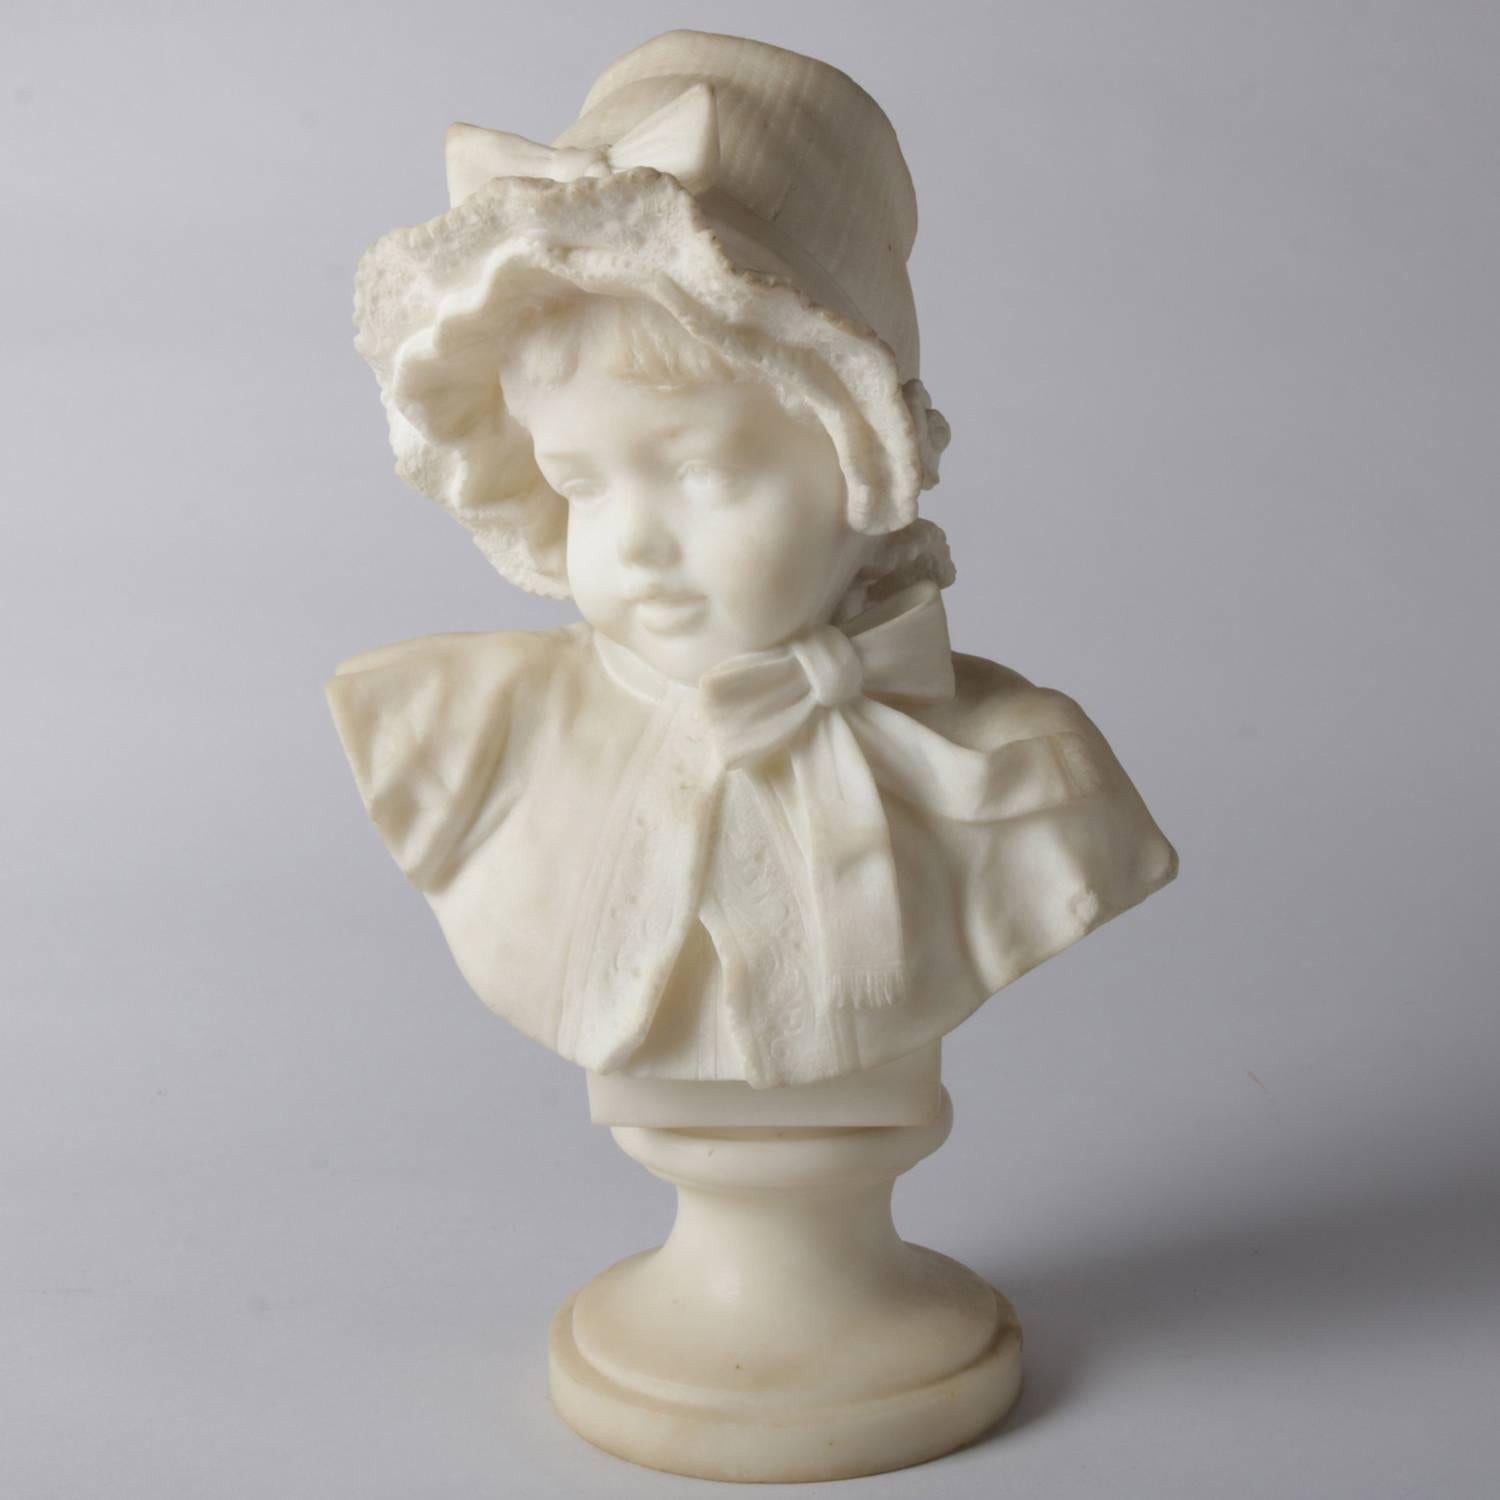 Italian Lapini School well executed and highly detailed Victorian carved marble bust depicts young girl with bonnet, bow, and lace trimmed cape, 19th century

Measures: 14.5